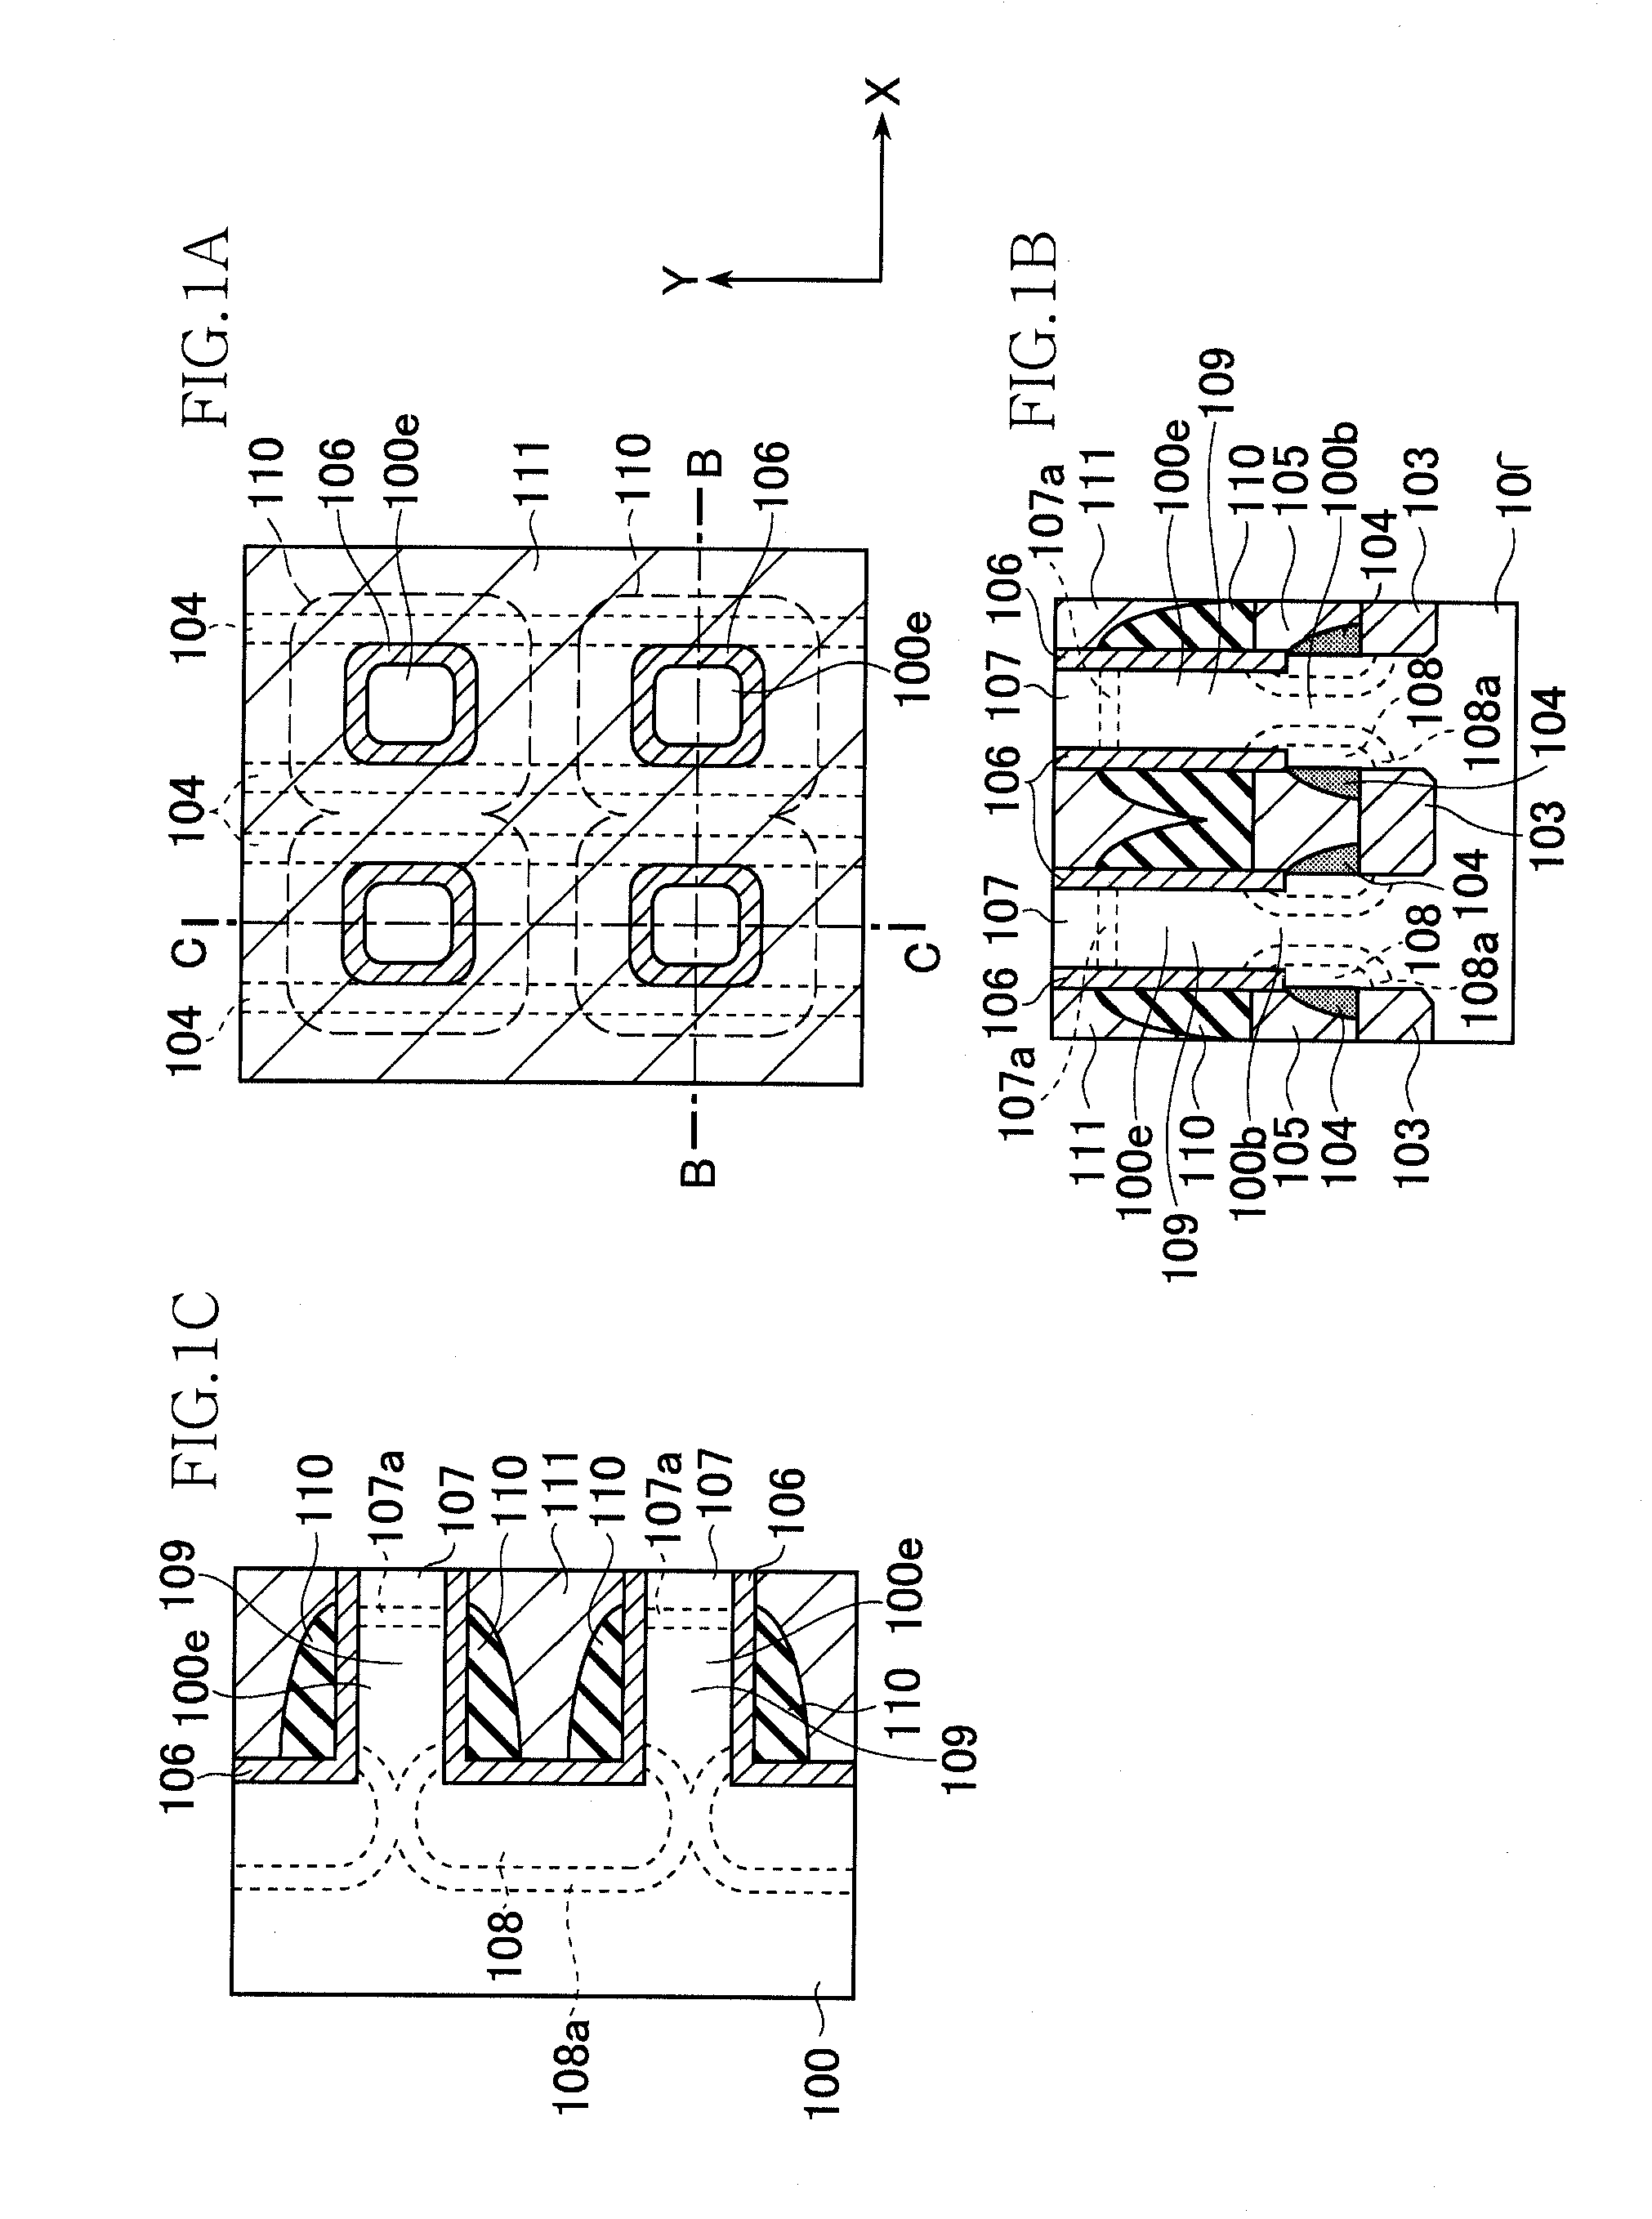 Semiconductor device and manufaturing method thereof